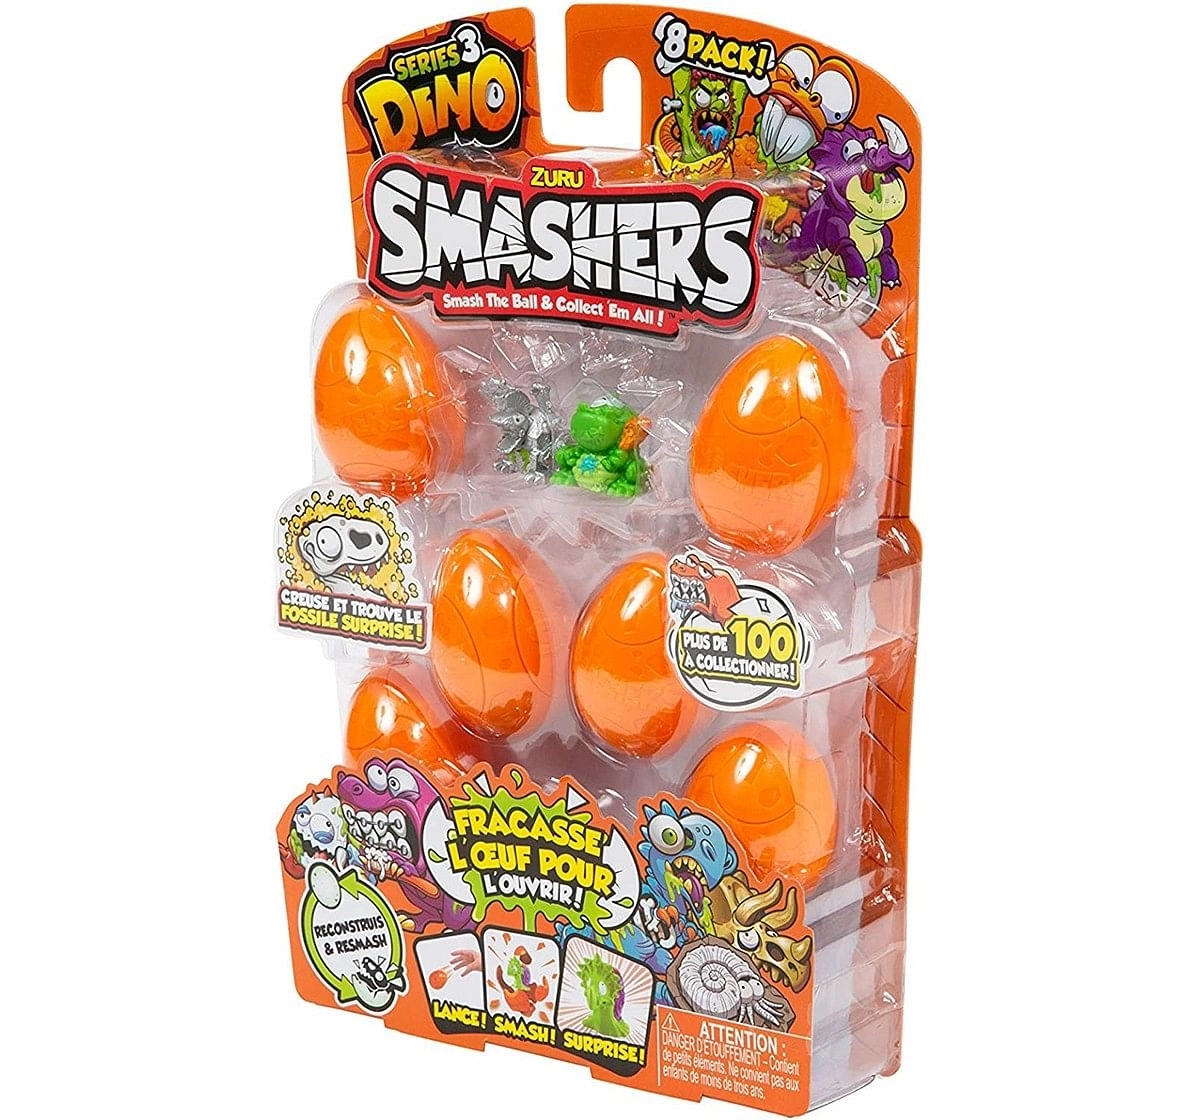 Smashers 7438 Series 3 Toy, One Size Novelty for Kids age 4Y+ (Orange)